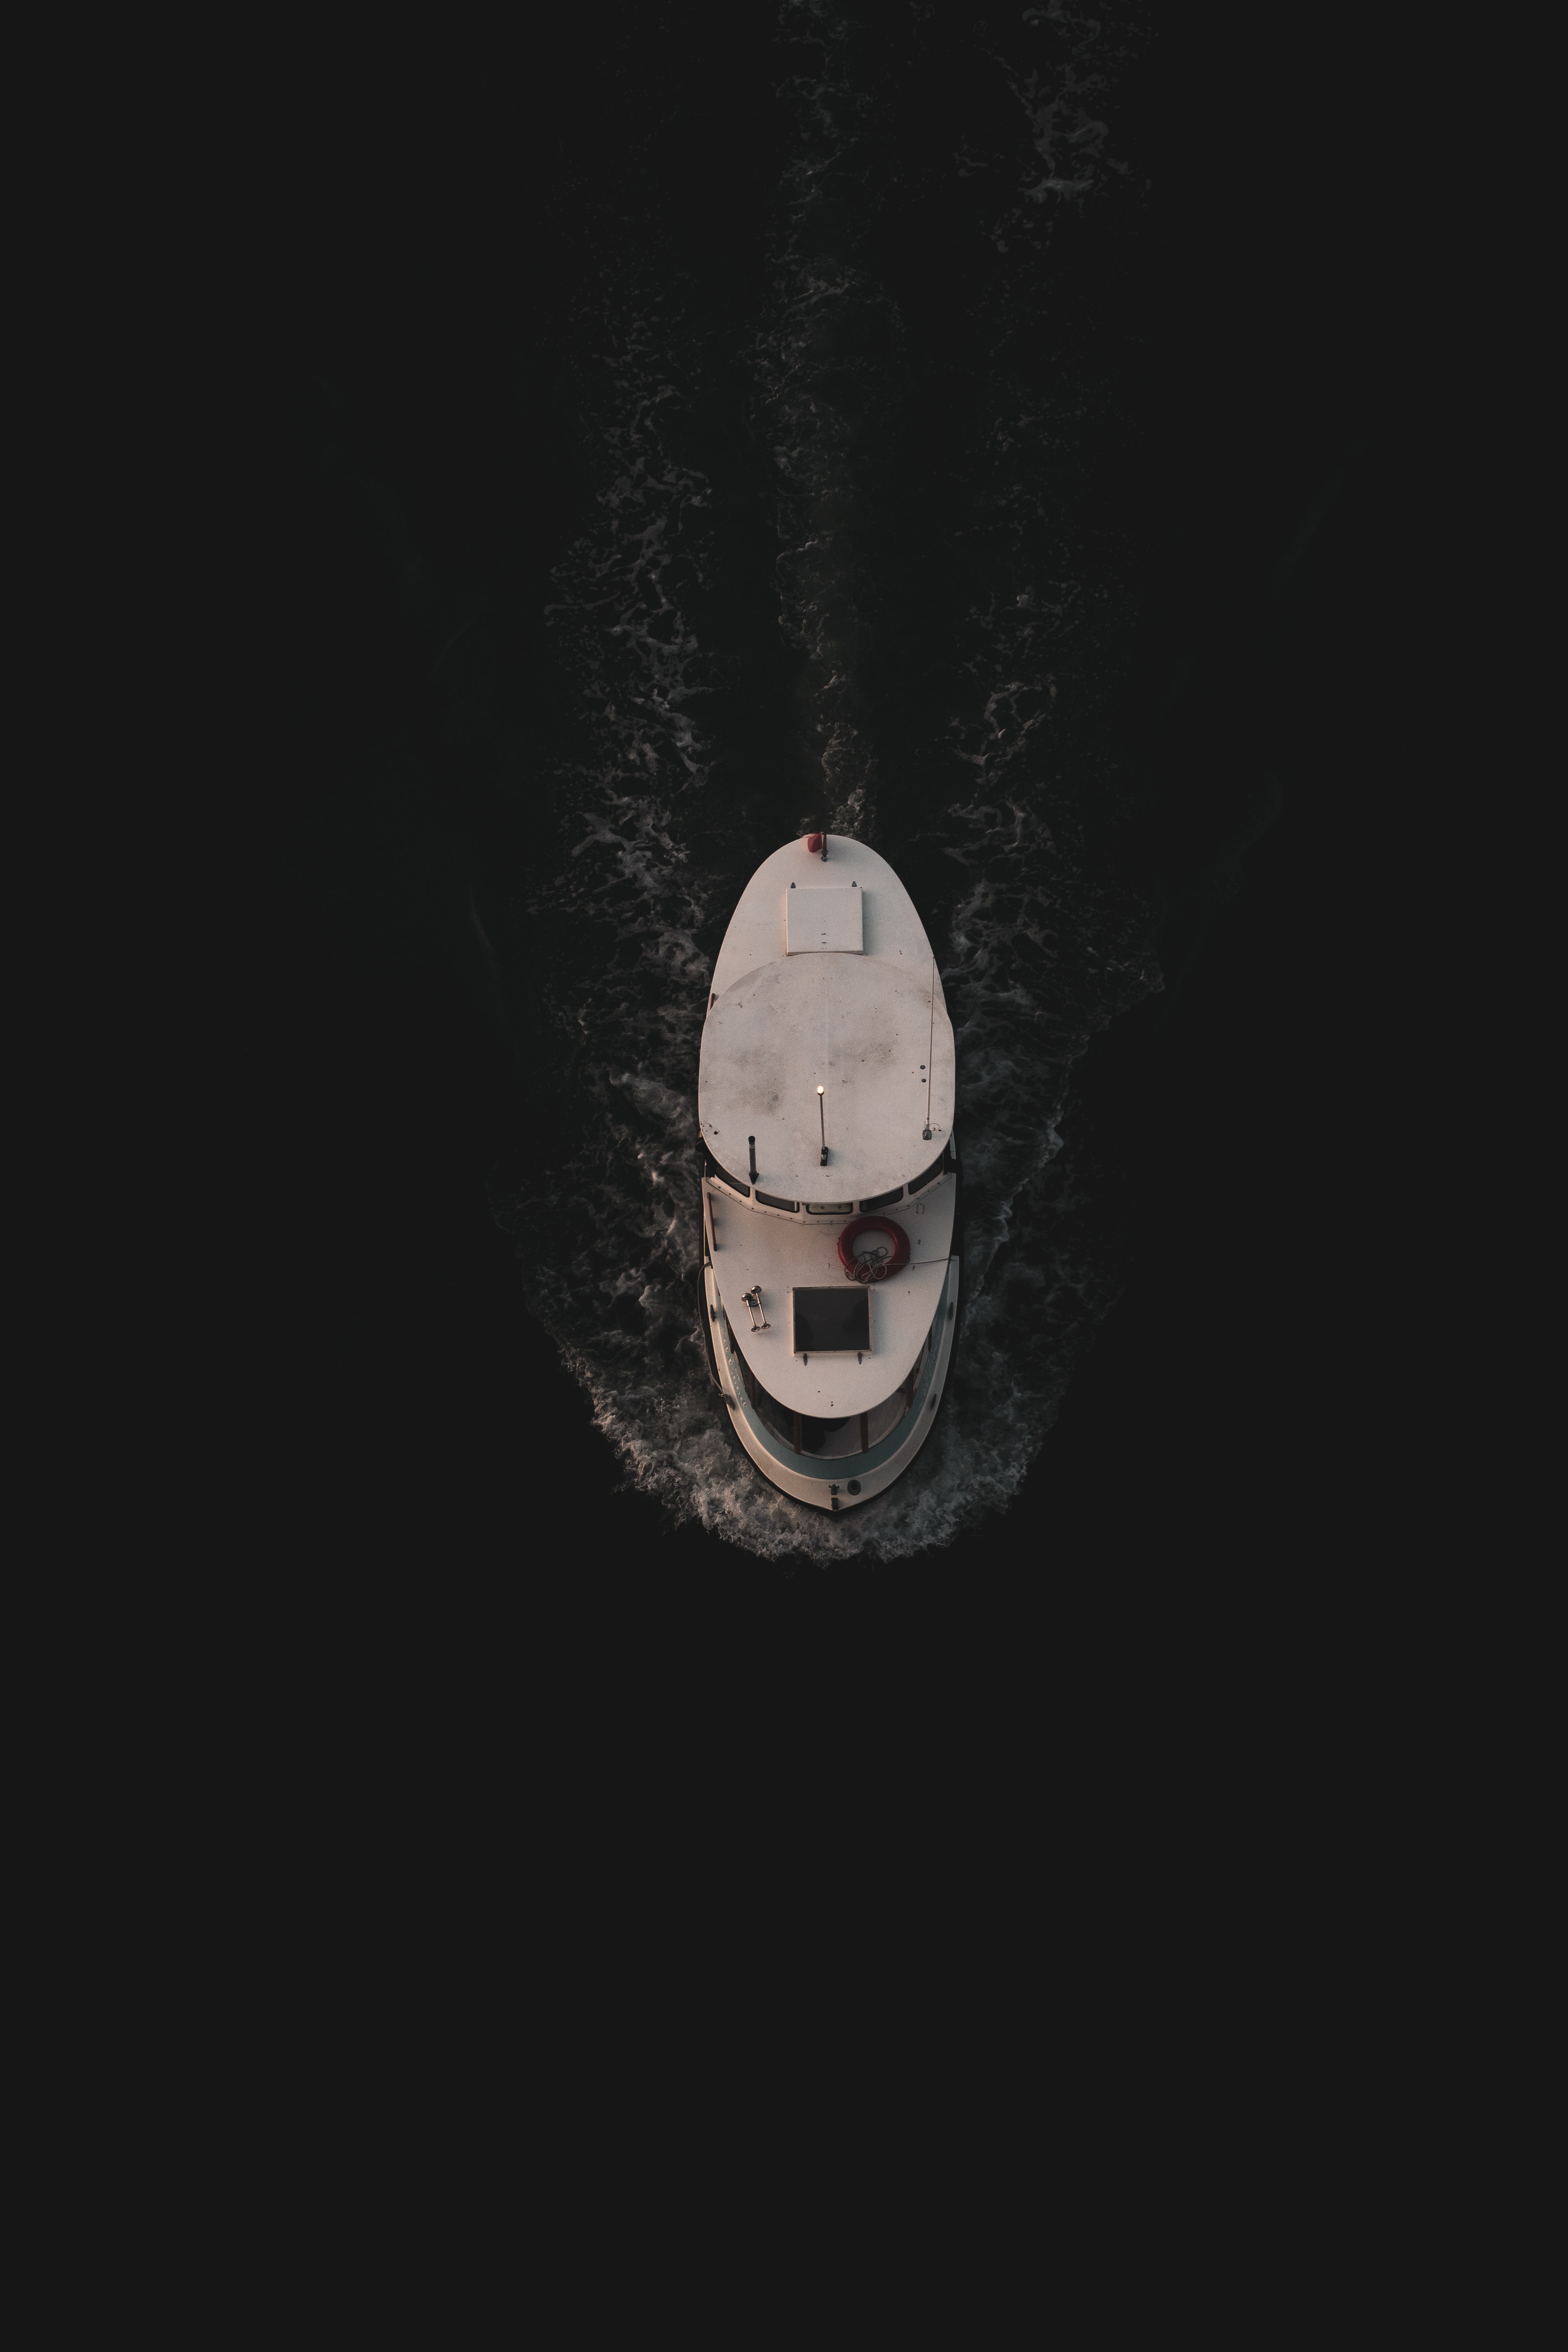 32k Wallpaper Boat miscellanea, water, miscellaneous, view from above